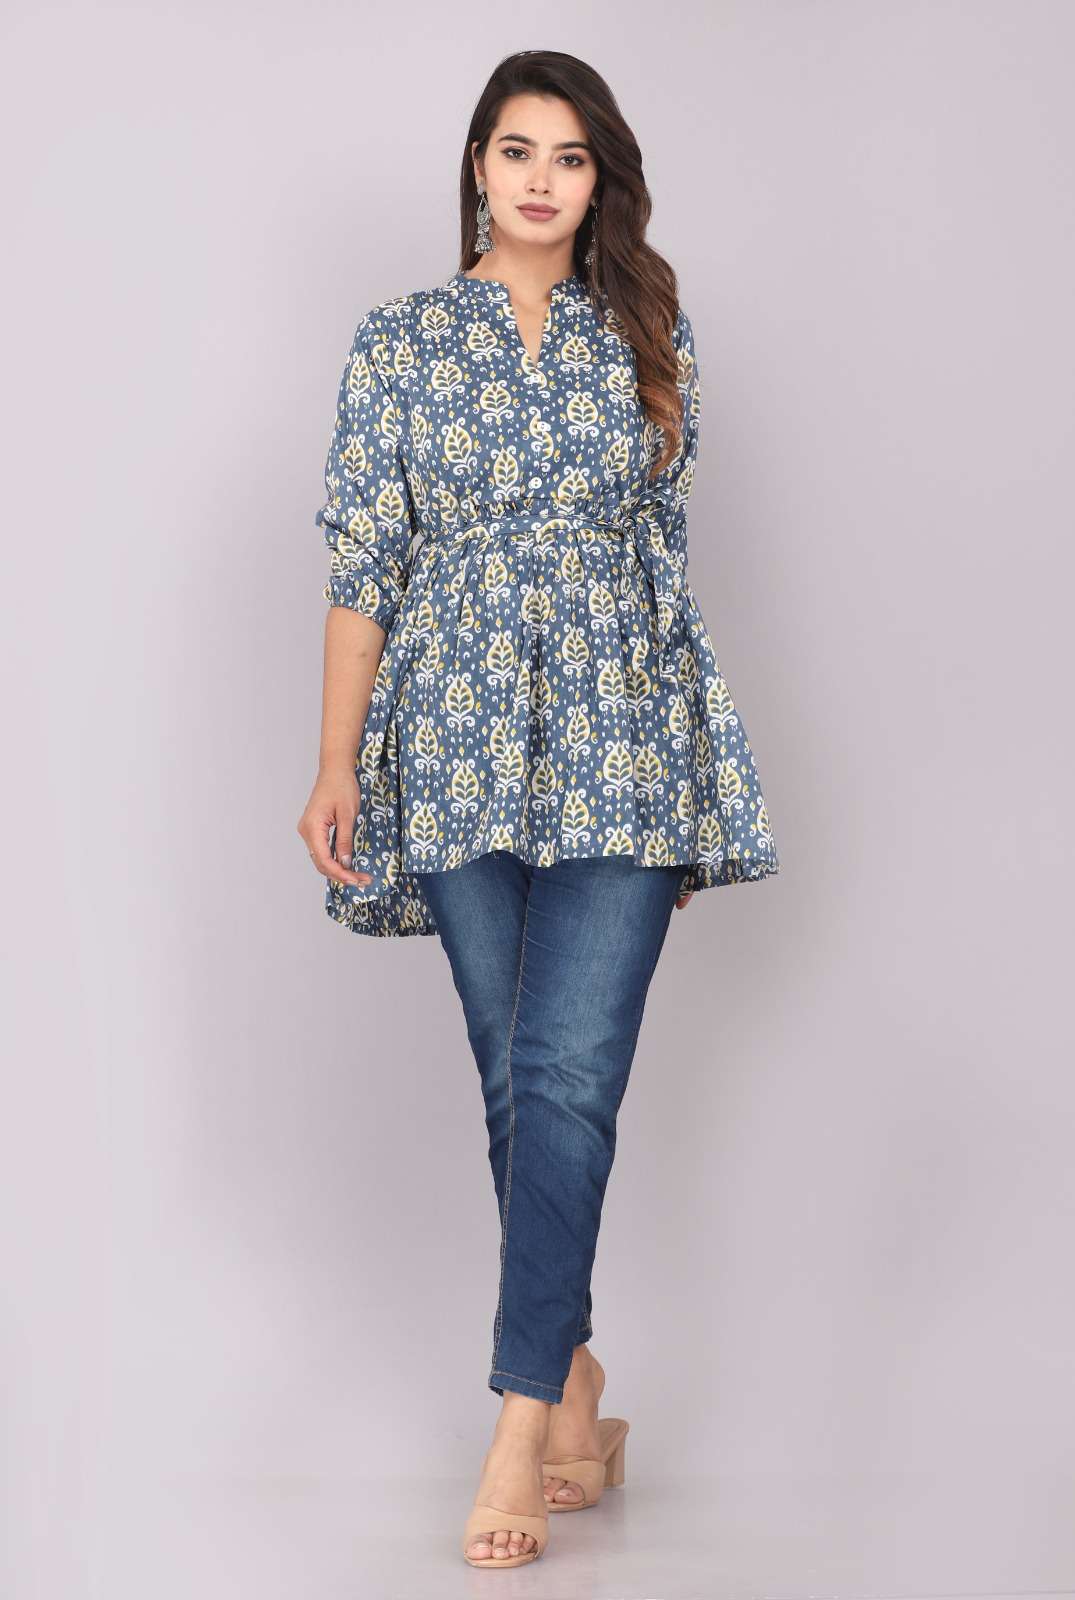 Buy Stylish Indianwear At Best Deals Online